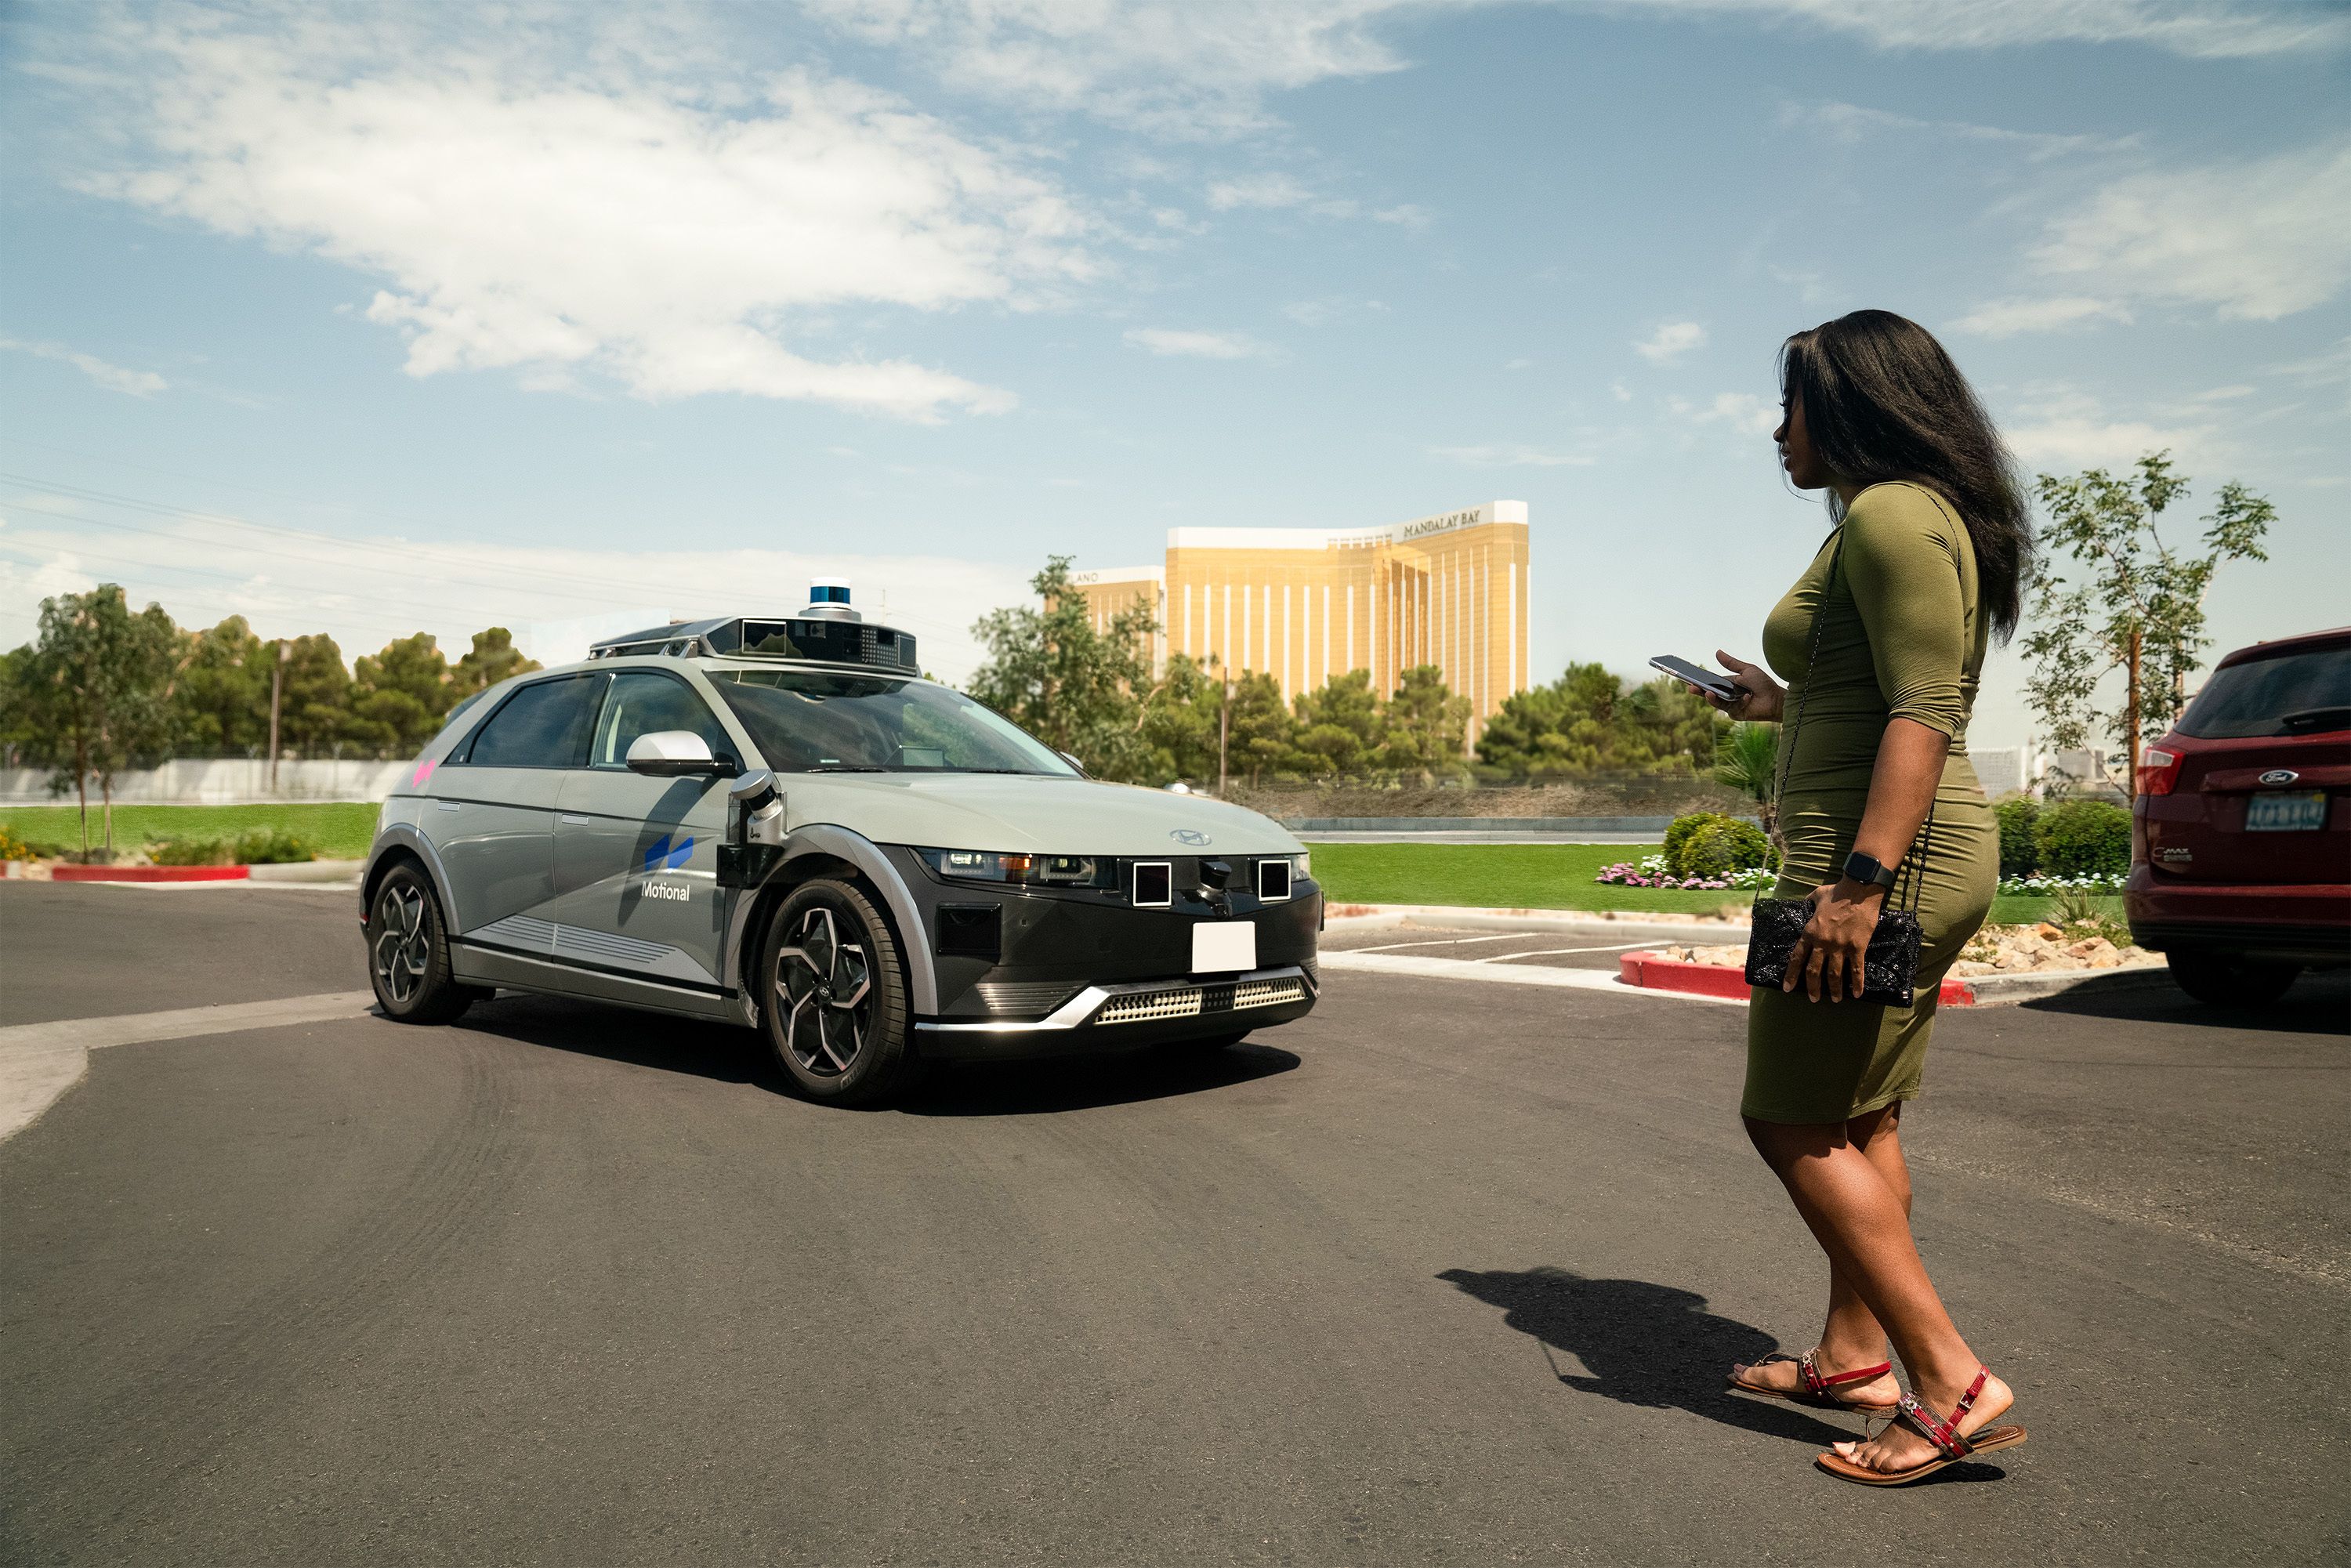 Motional's IONIQ 5 robotaxi picking up a rider in Las Vegas